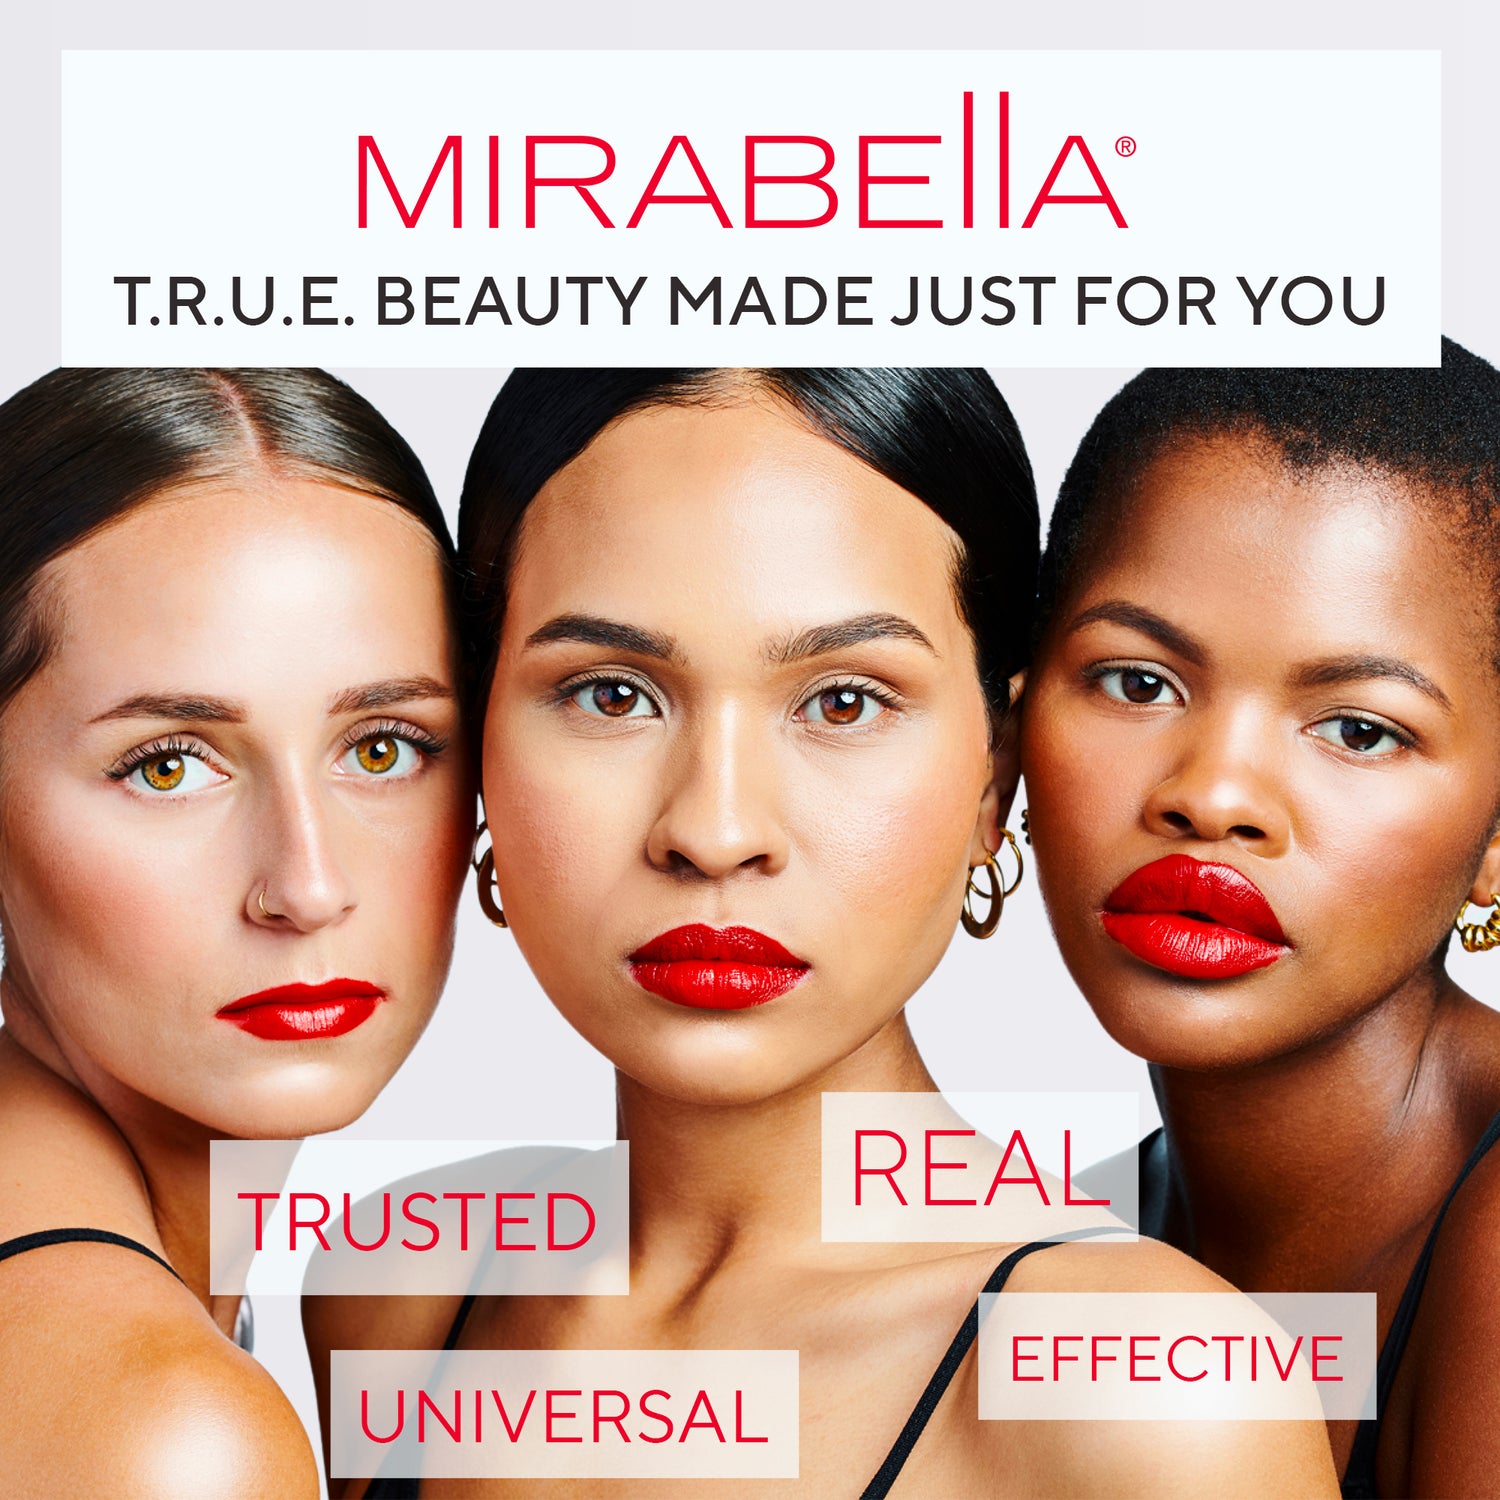 Mirabella Beauty - Purify Instant Brush Cleanser T.R.U.E. Beauty Made Just For You